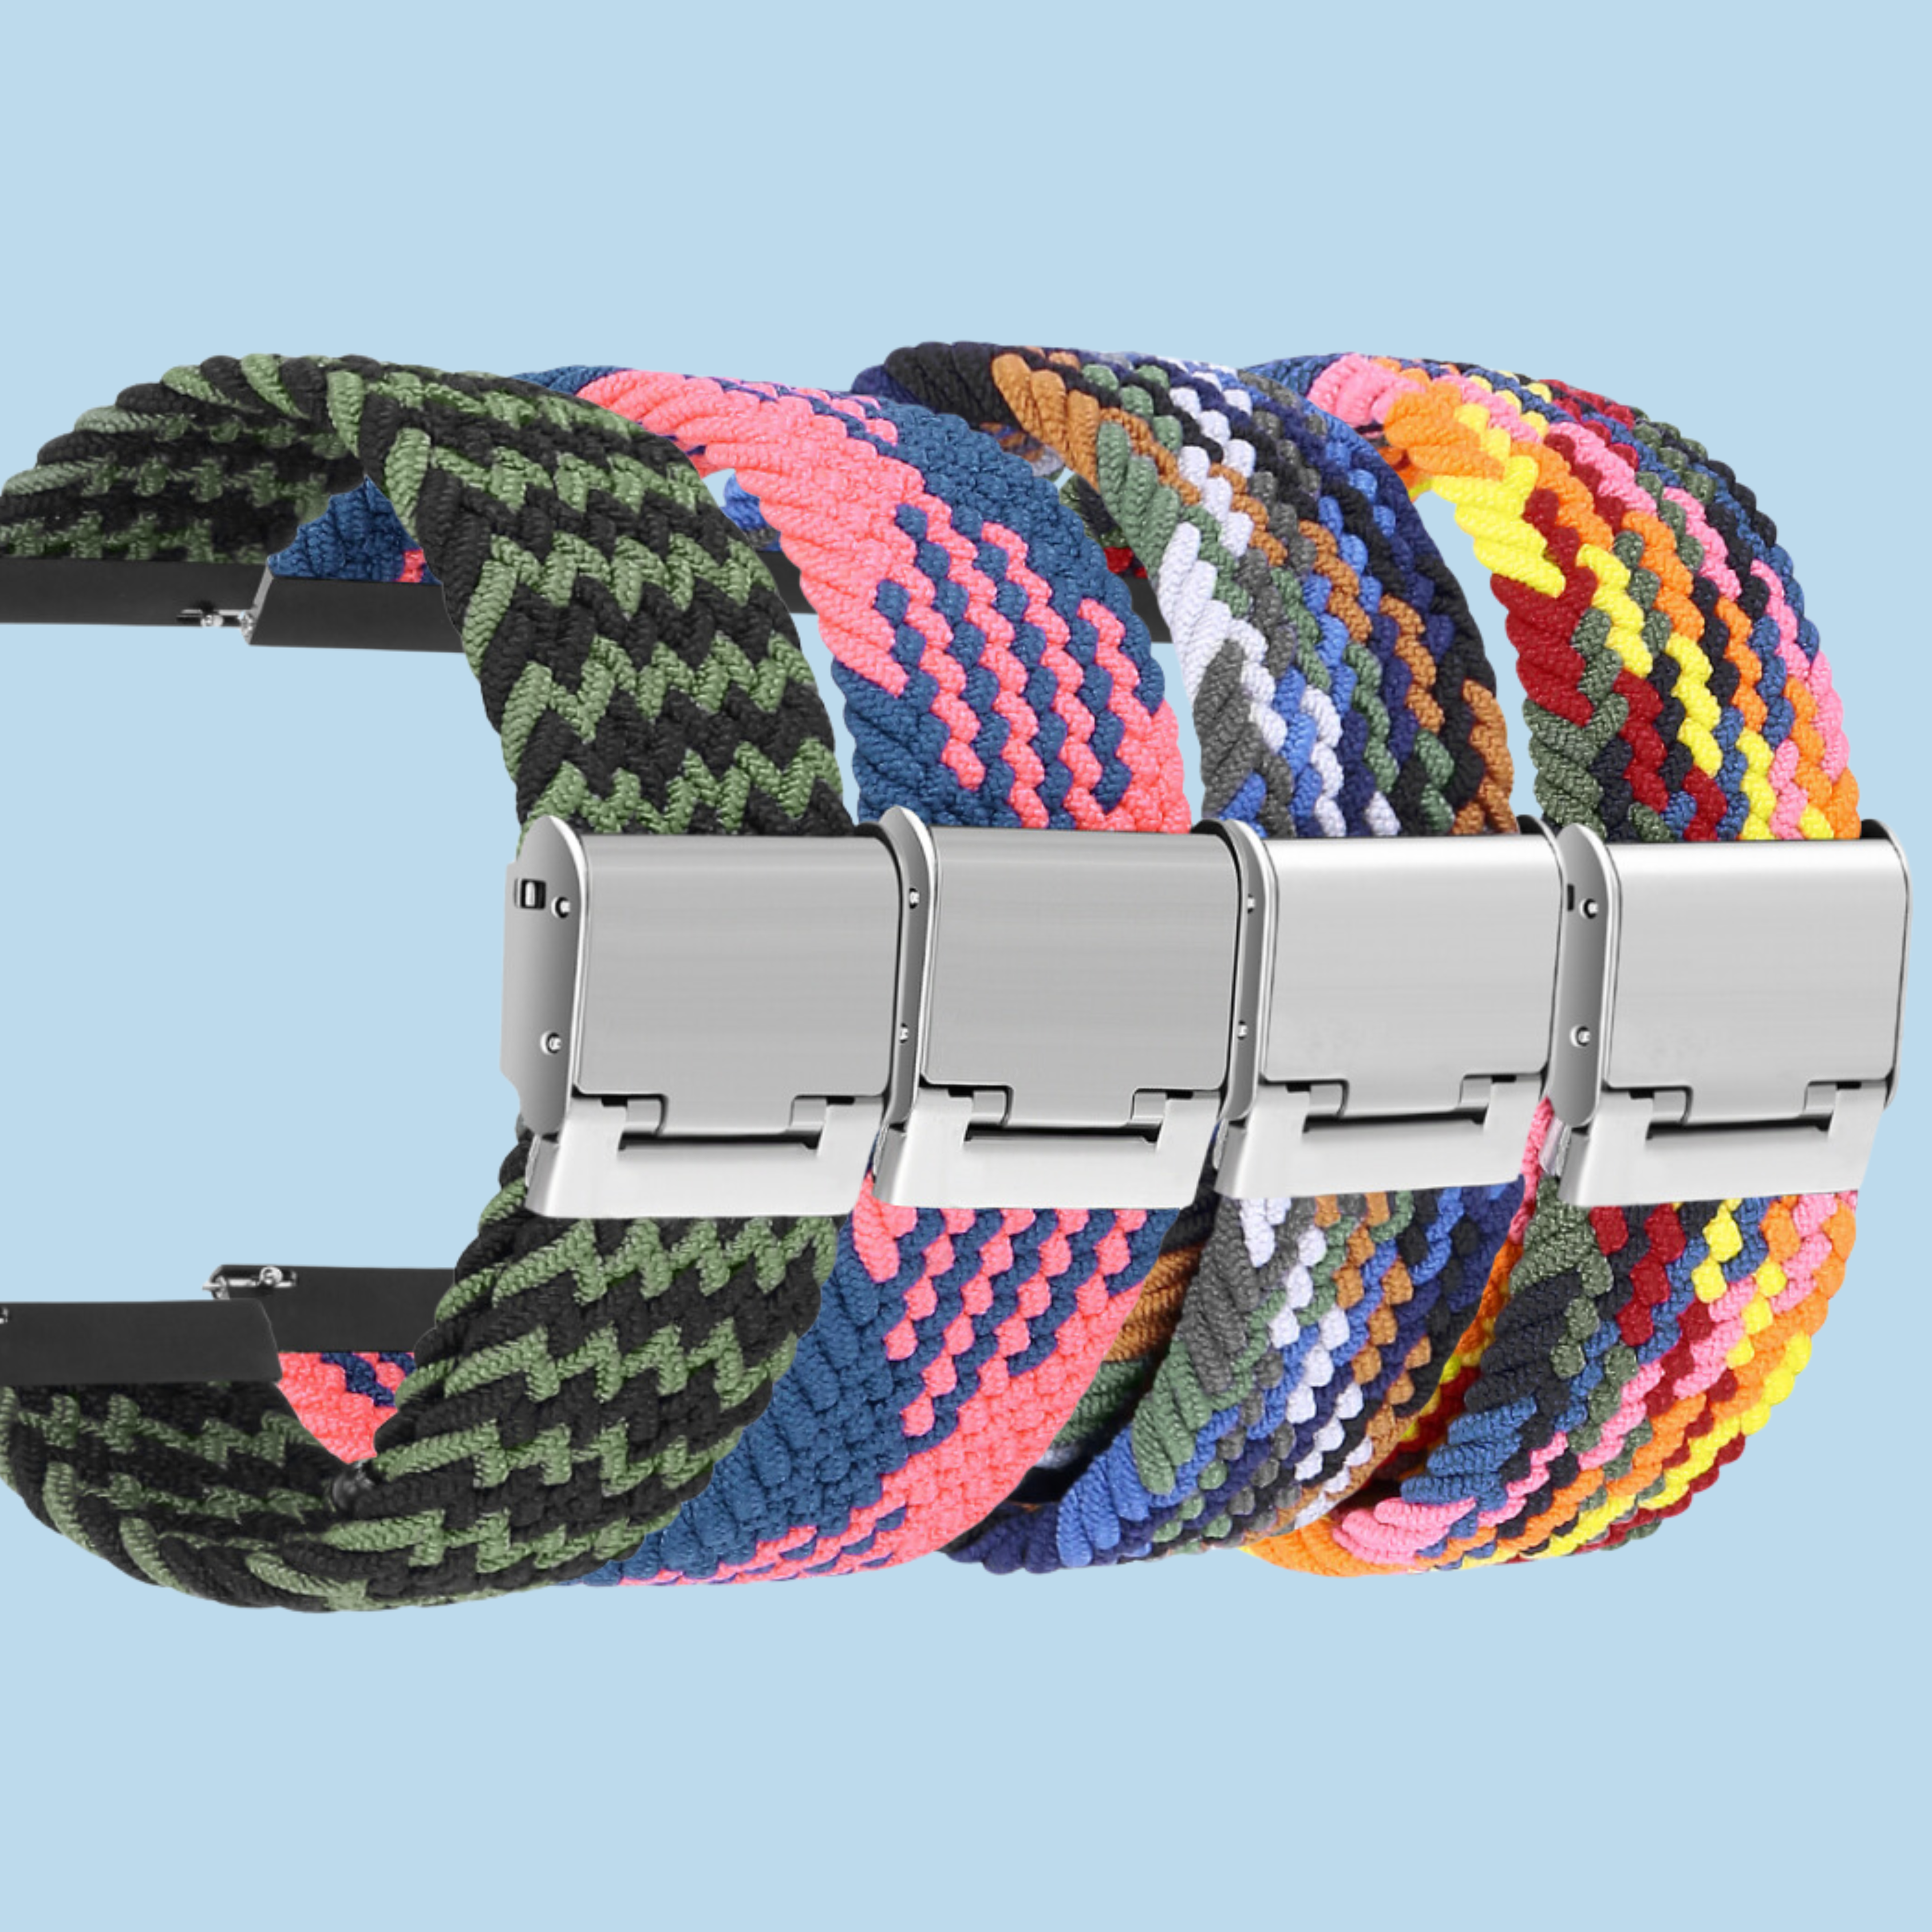 Pink and Blue  Braided Nylon Watch Band